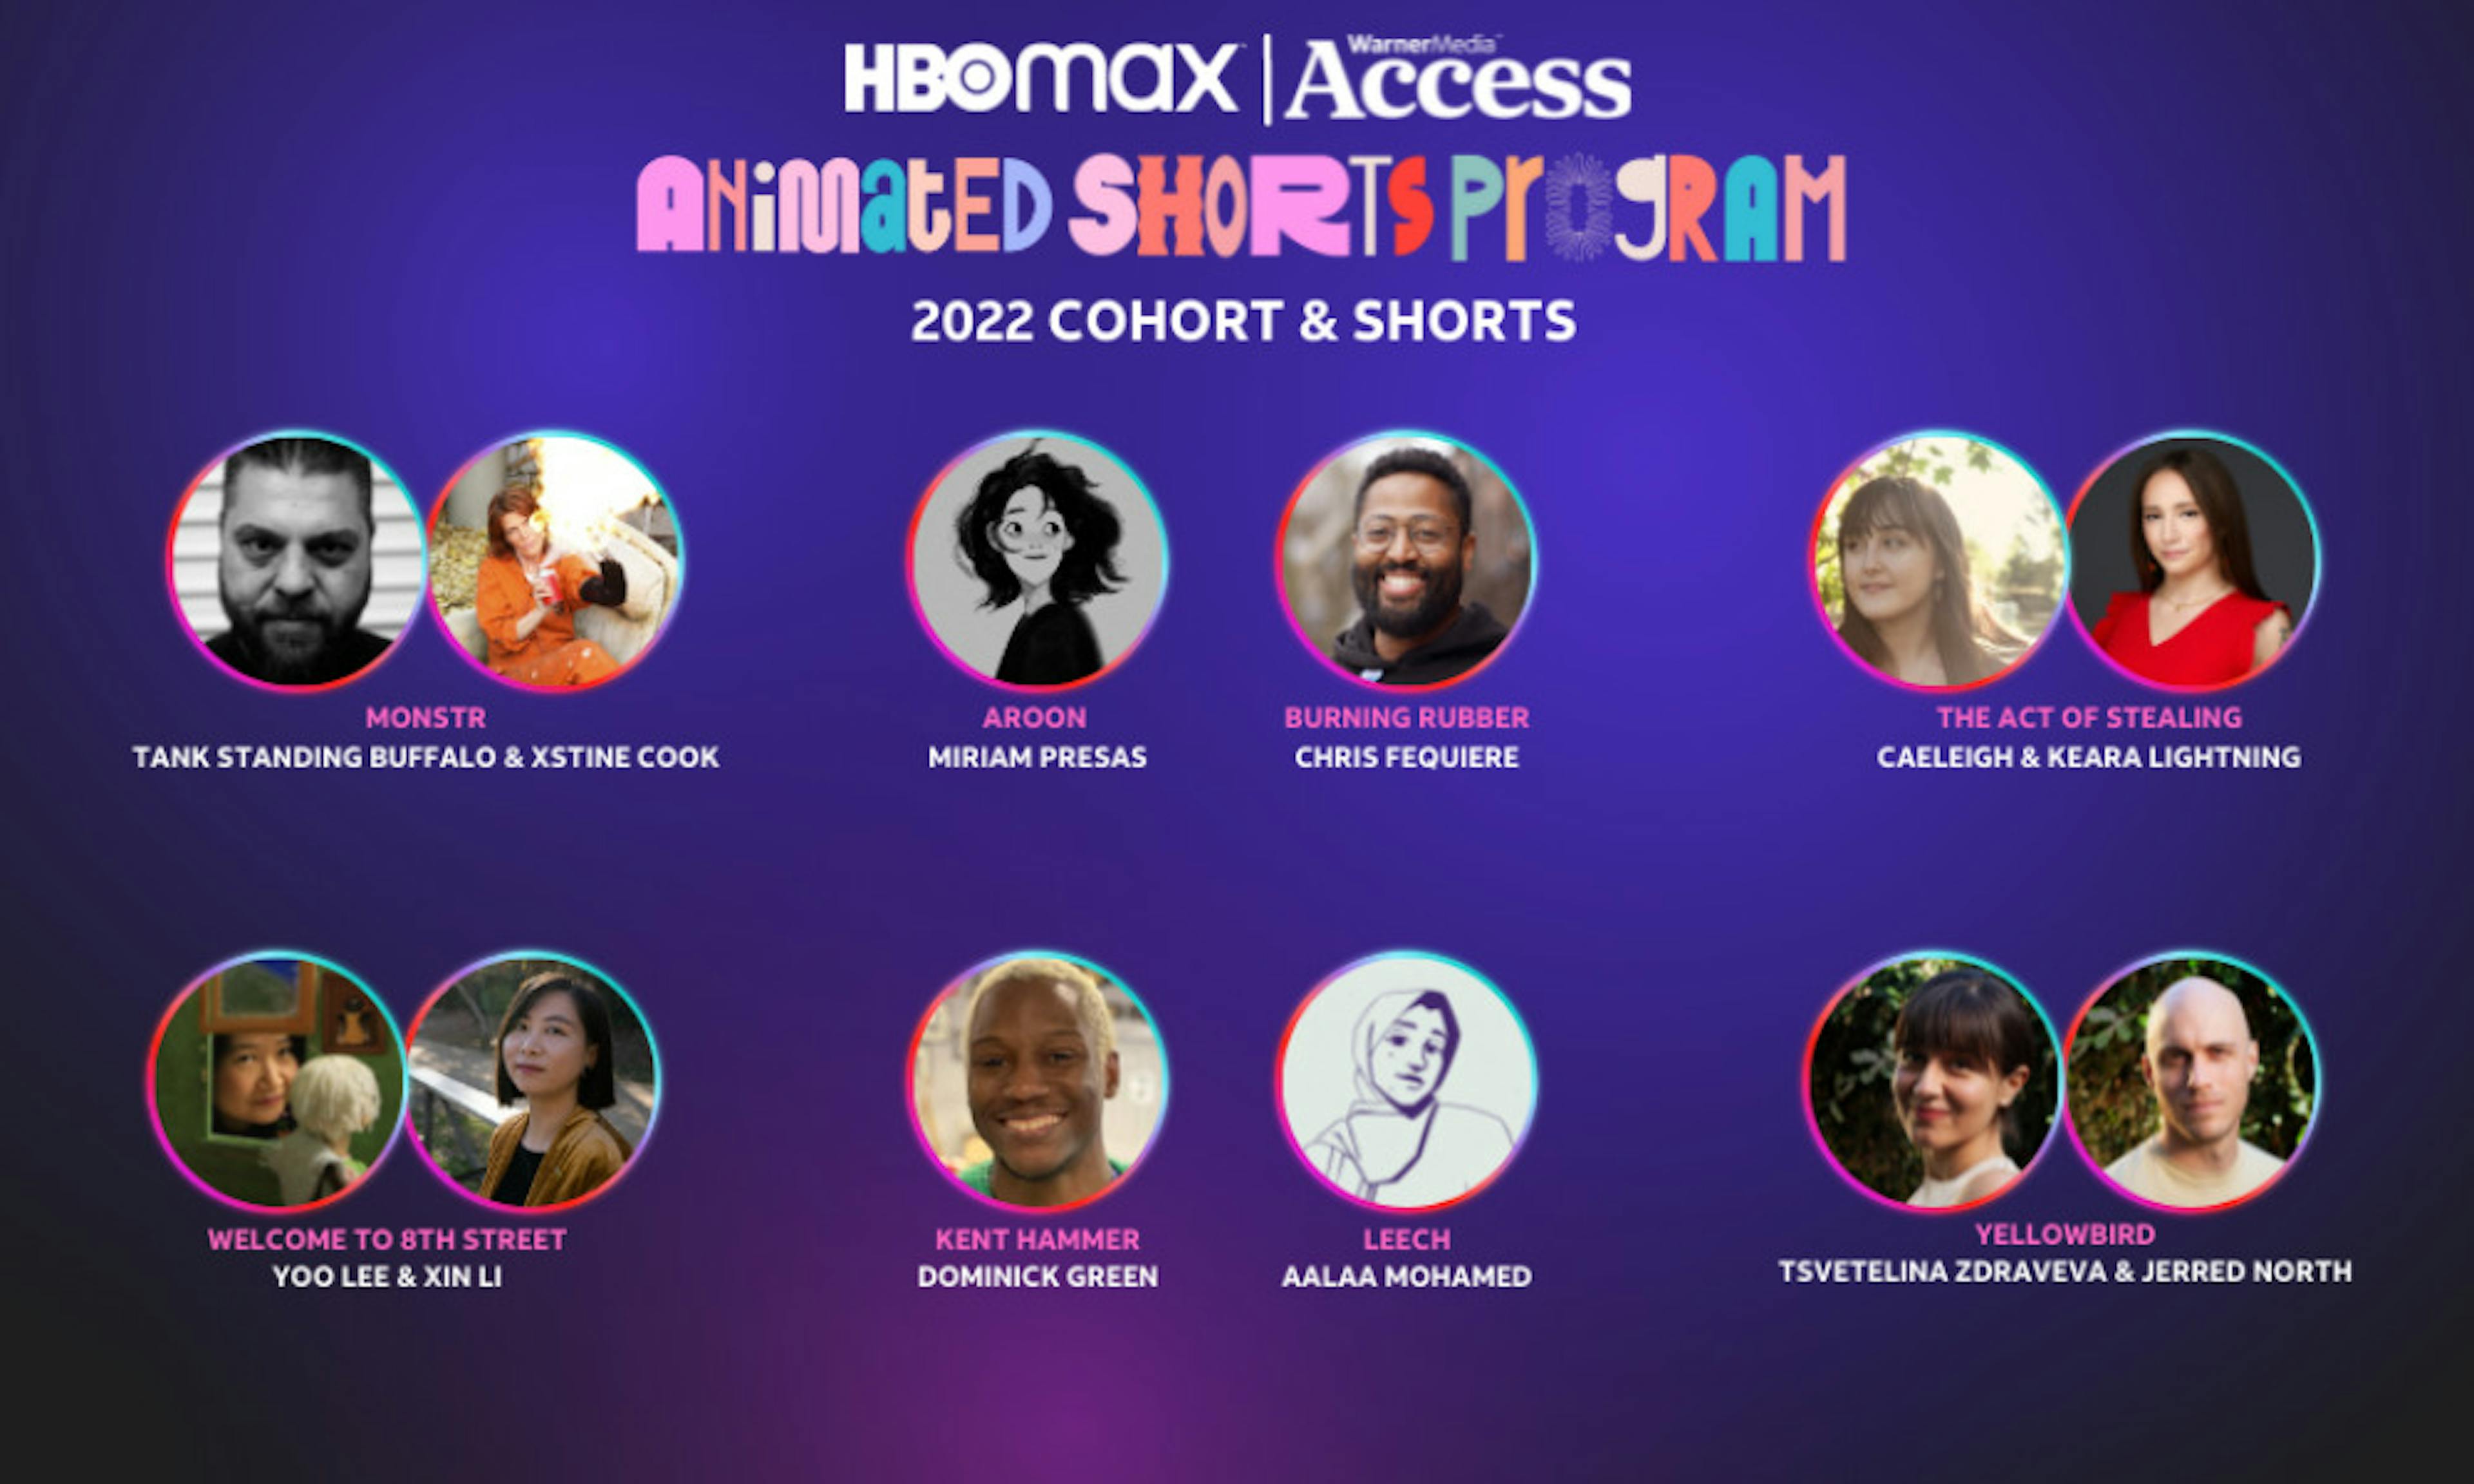 A graphic with the text HBOmax | WarnerMedia Access Animated Shorts Program 2022 Cohort & Shorts, with images of the artists in the cohort, including Tank Standing Buffalo and Xstine Cook